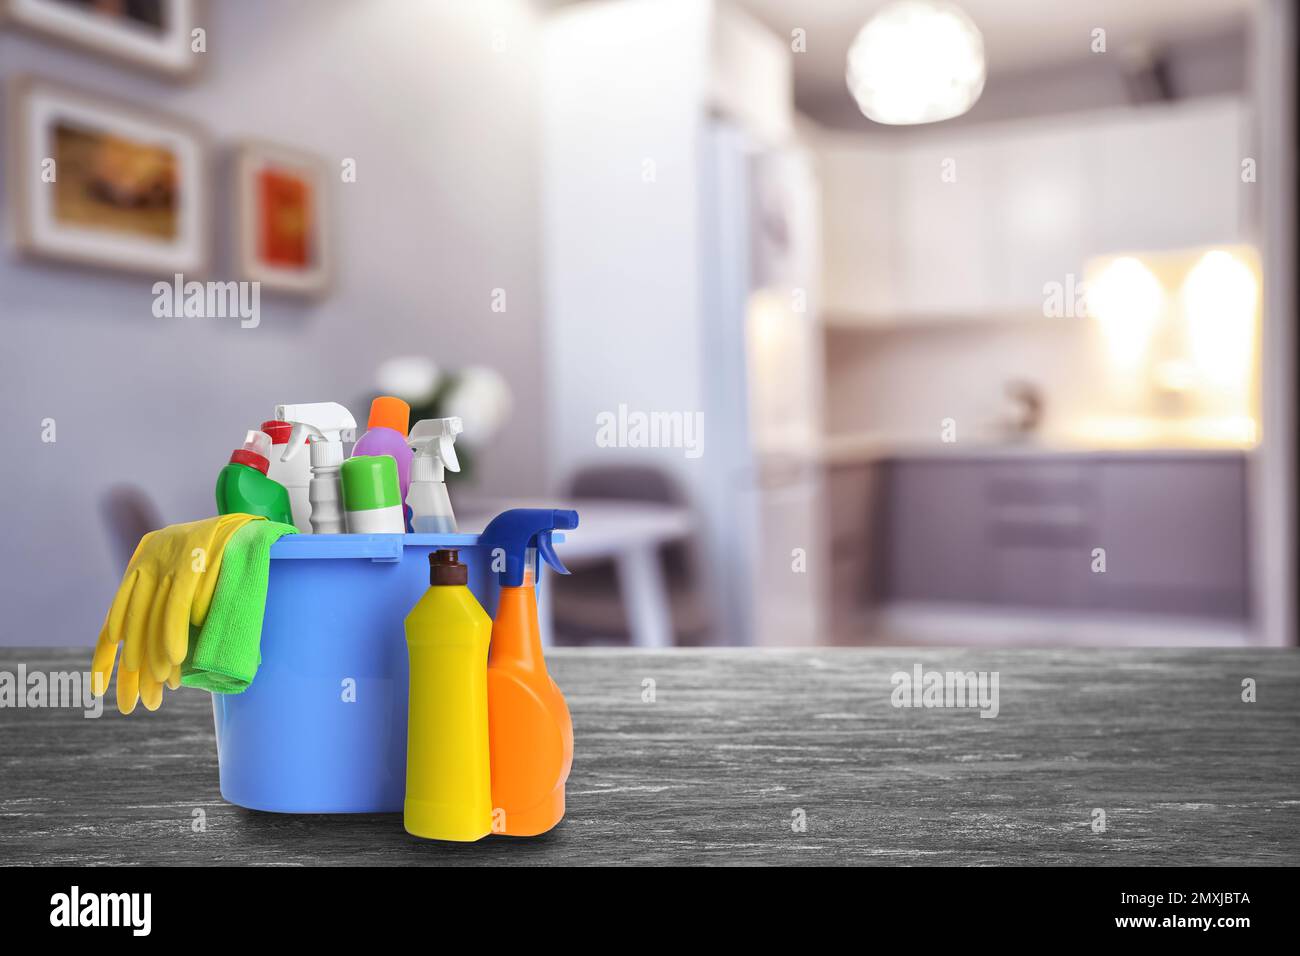 https://c8.alamy.com/comp/2MXJBTA/bucket-with-cleaning-supplies-on-stone-surface-in-modern-room-space-for-text-2MXJBTA.jpg